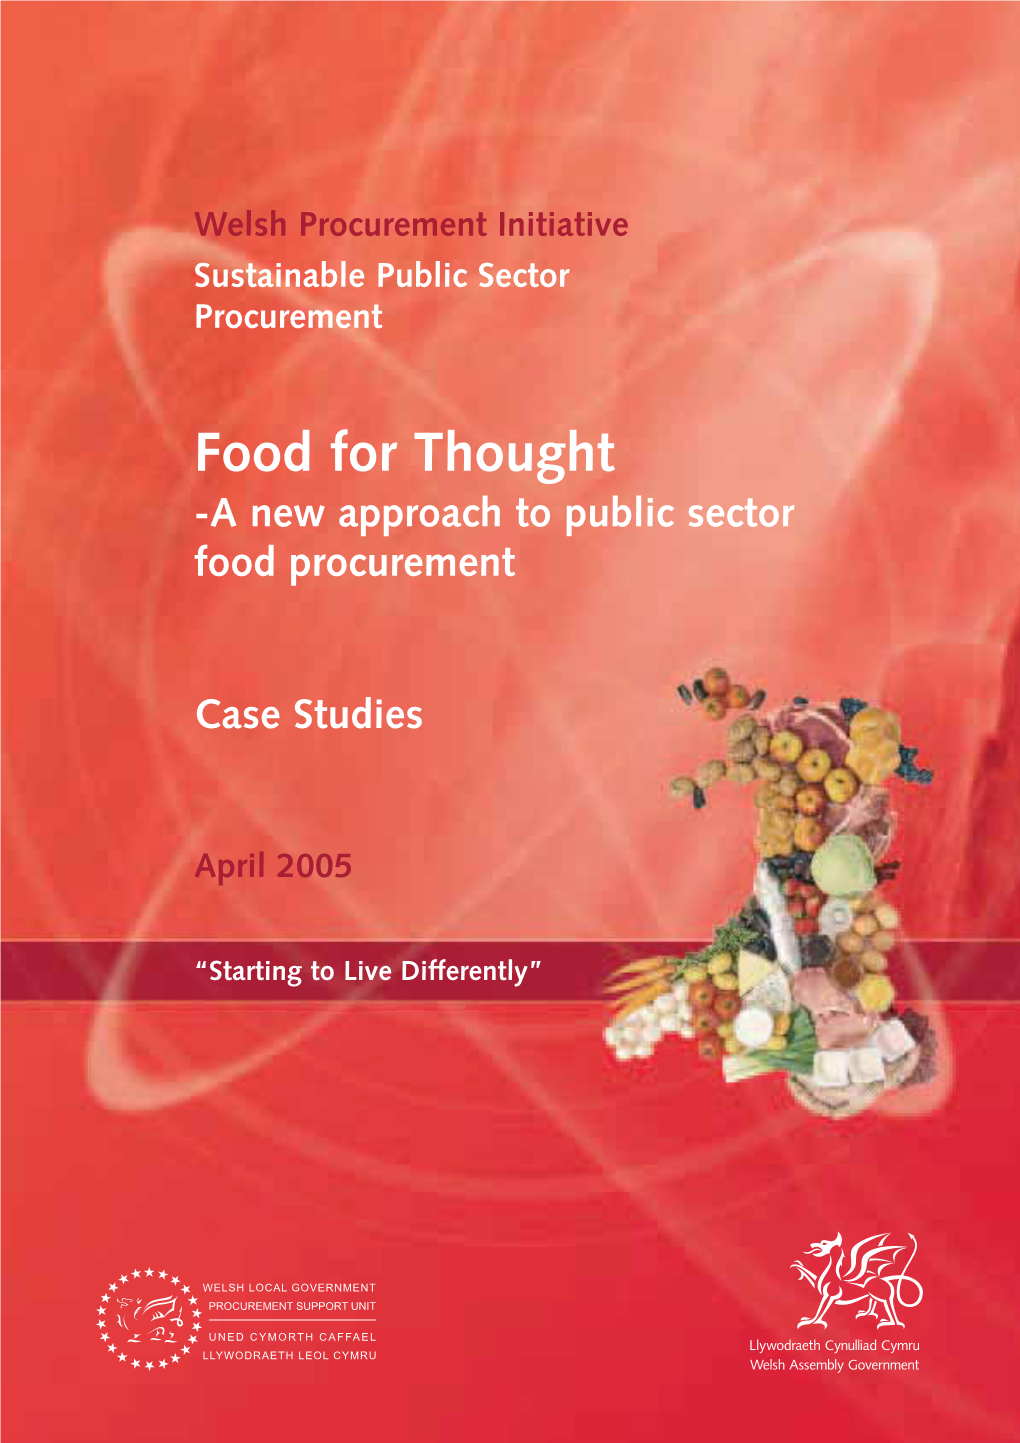 Food for Thought -A New Approach to Public Sector Food Procurement